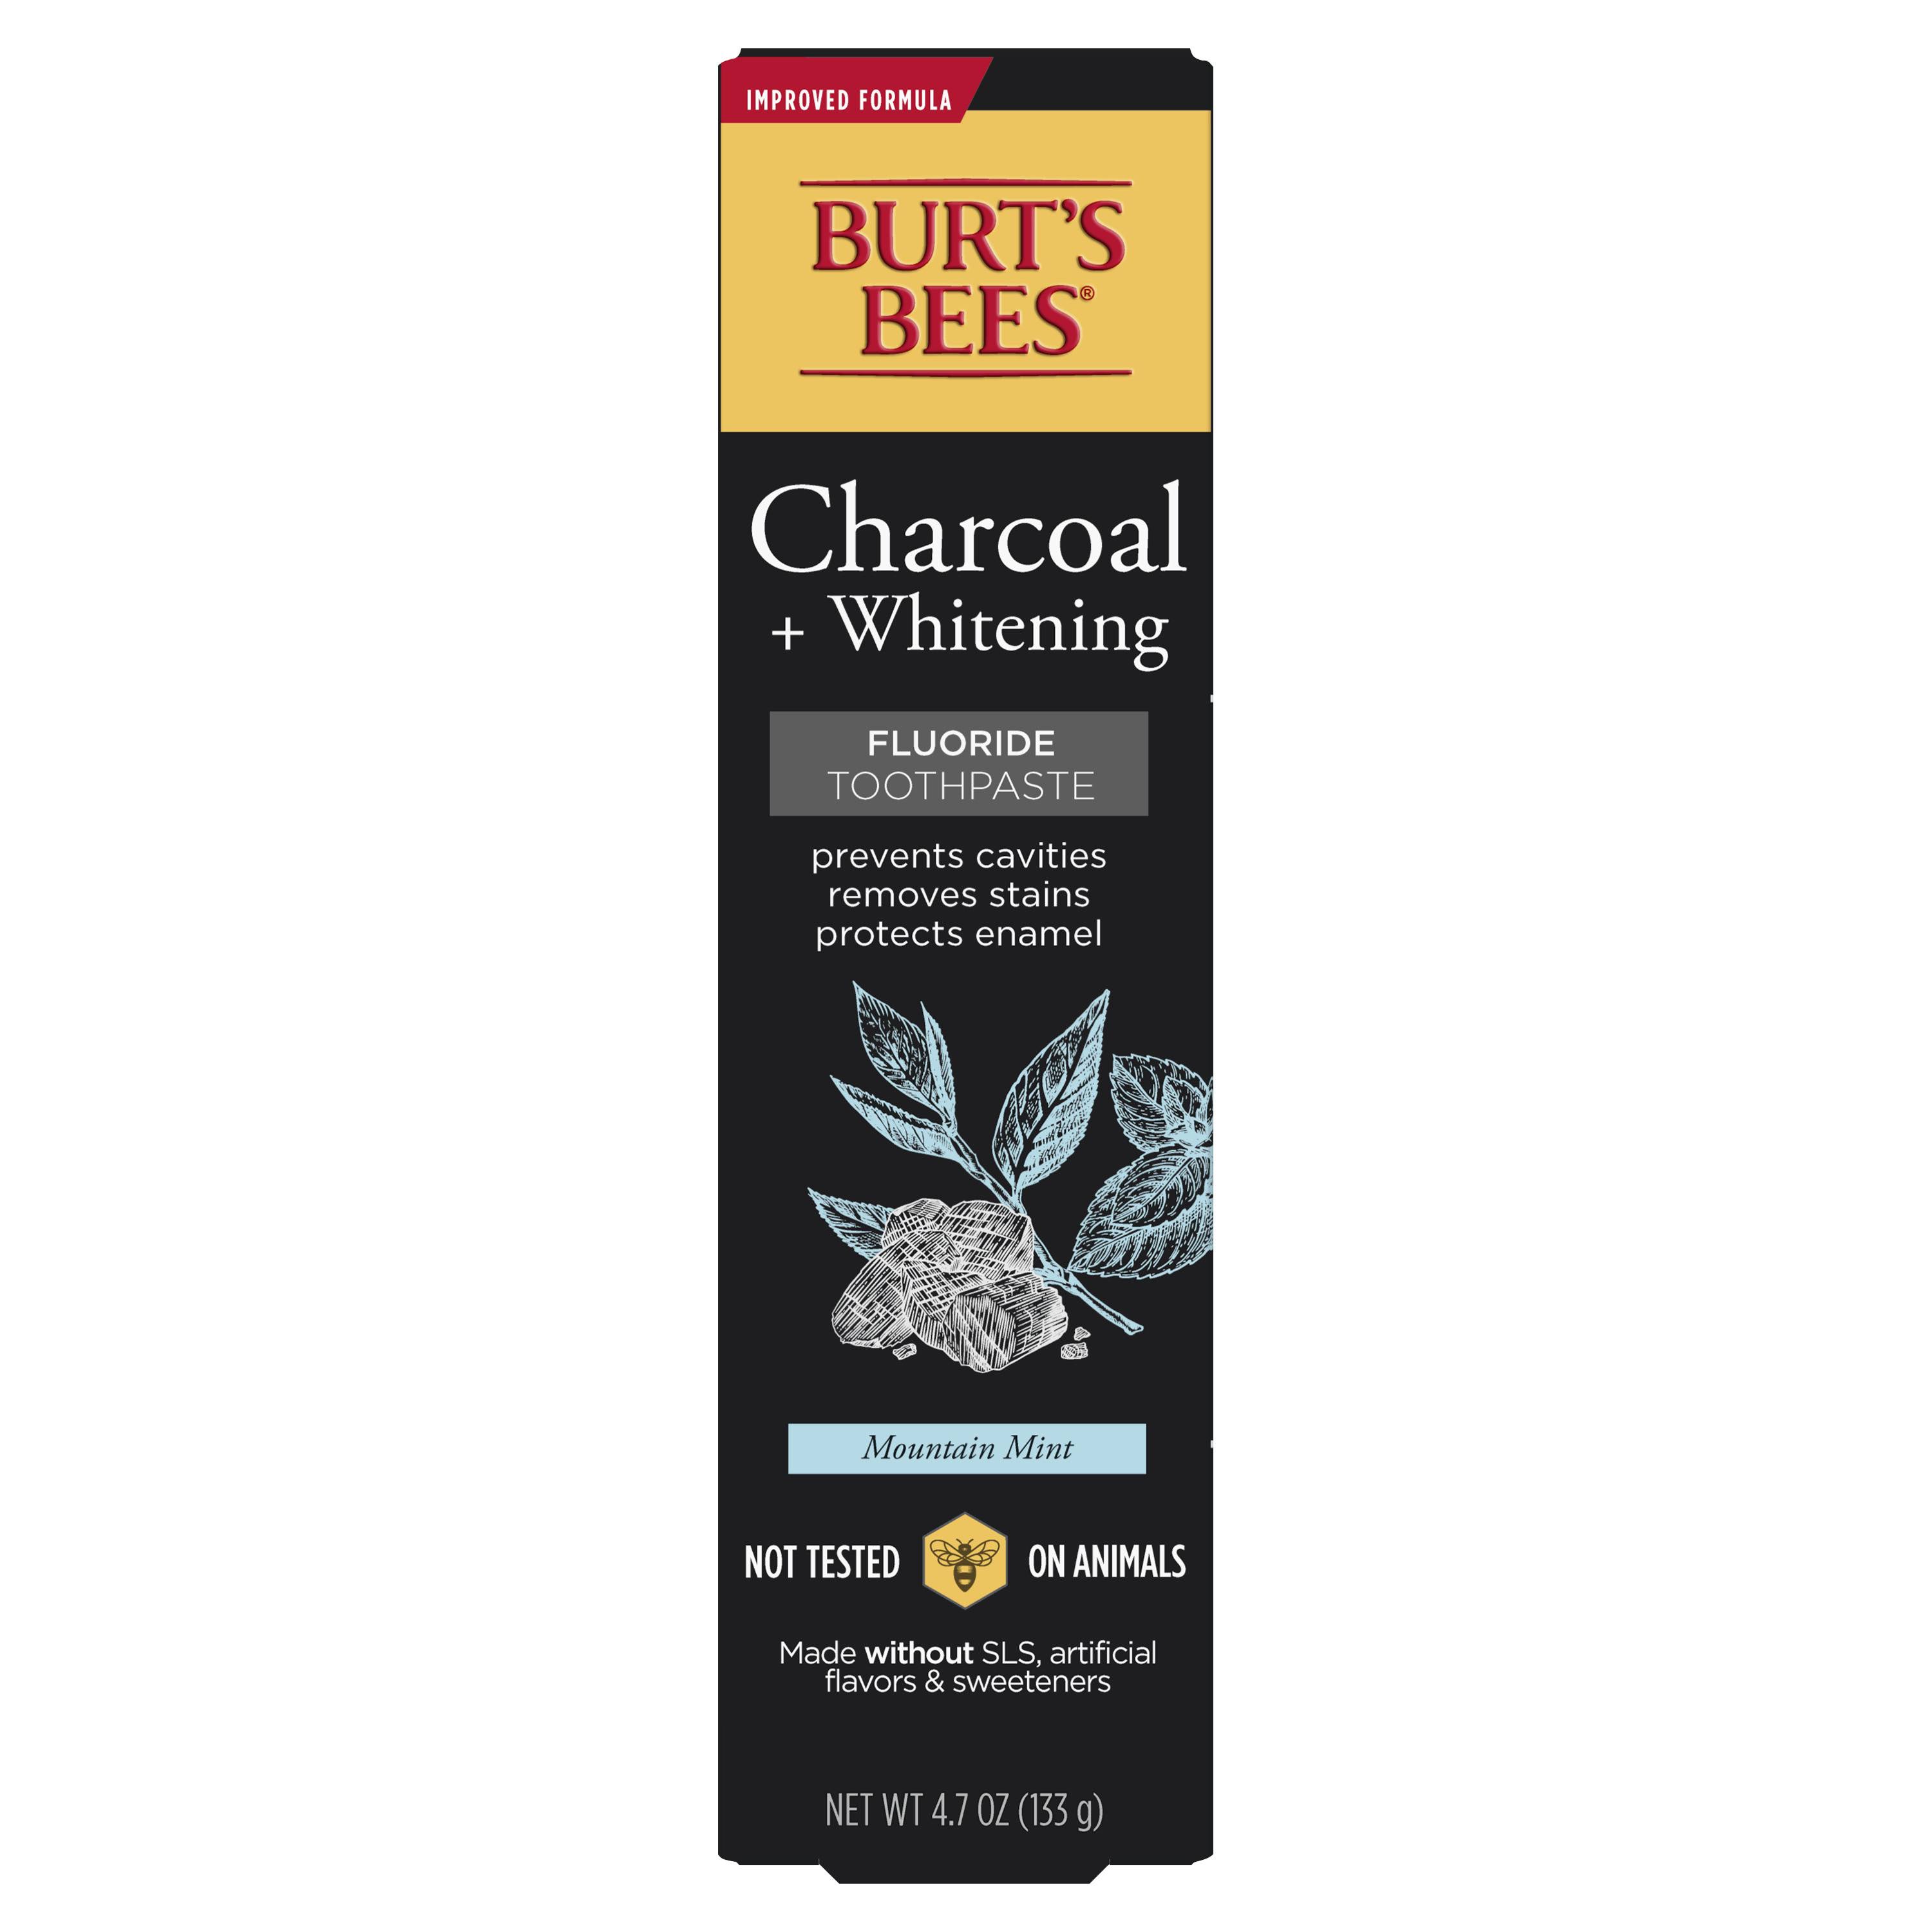 Burt's Bees Charcoal Peppermint Fluoride Toothpaste - 4.7oz